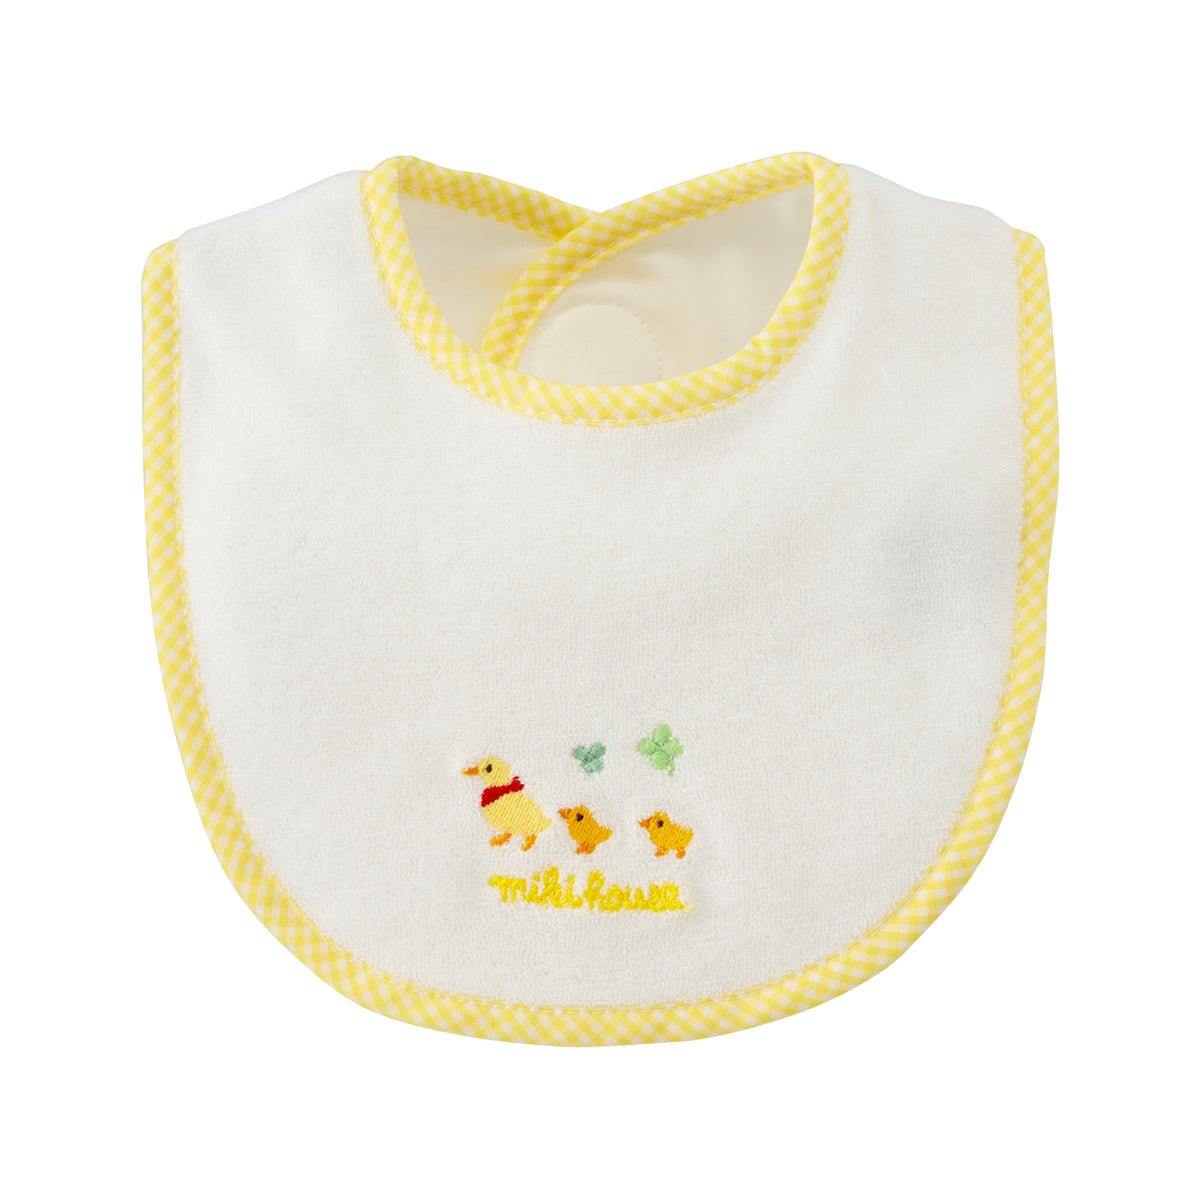 Buy Baby Gifts Online | Best Gifts For Newborn – Bellas House